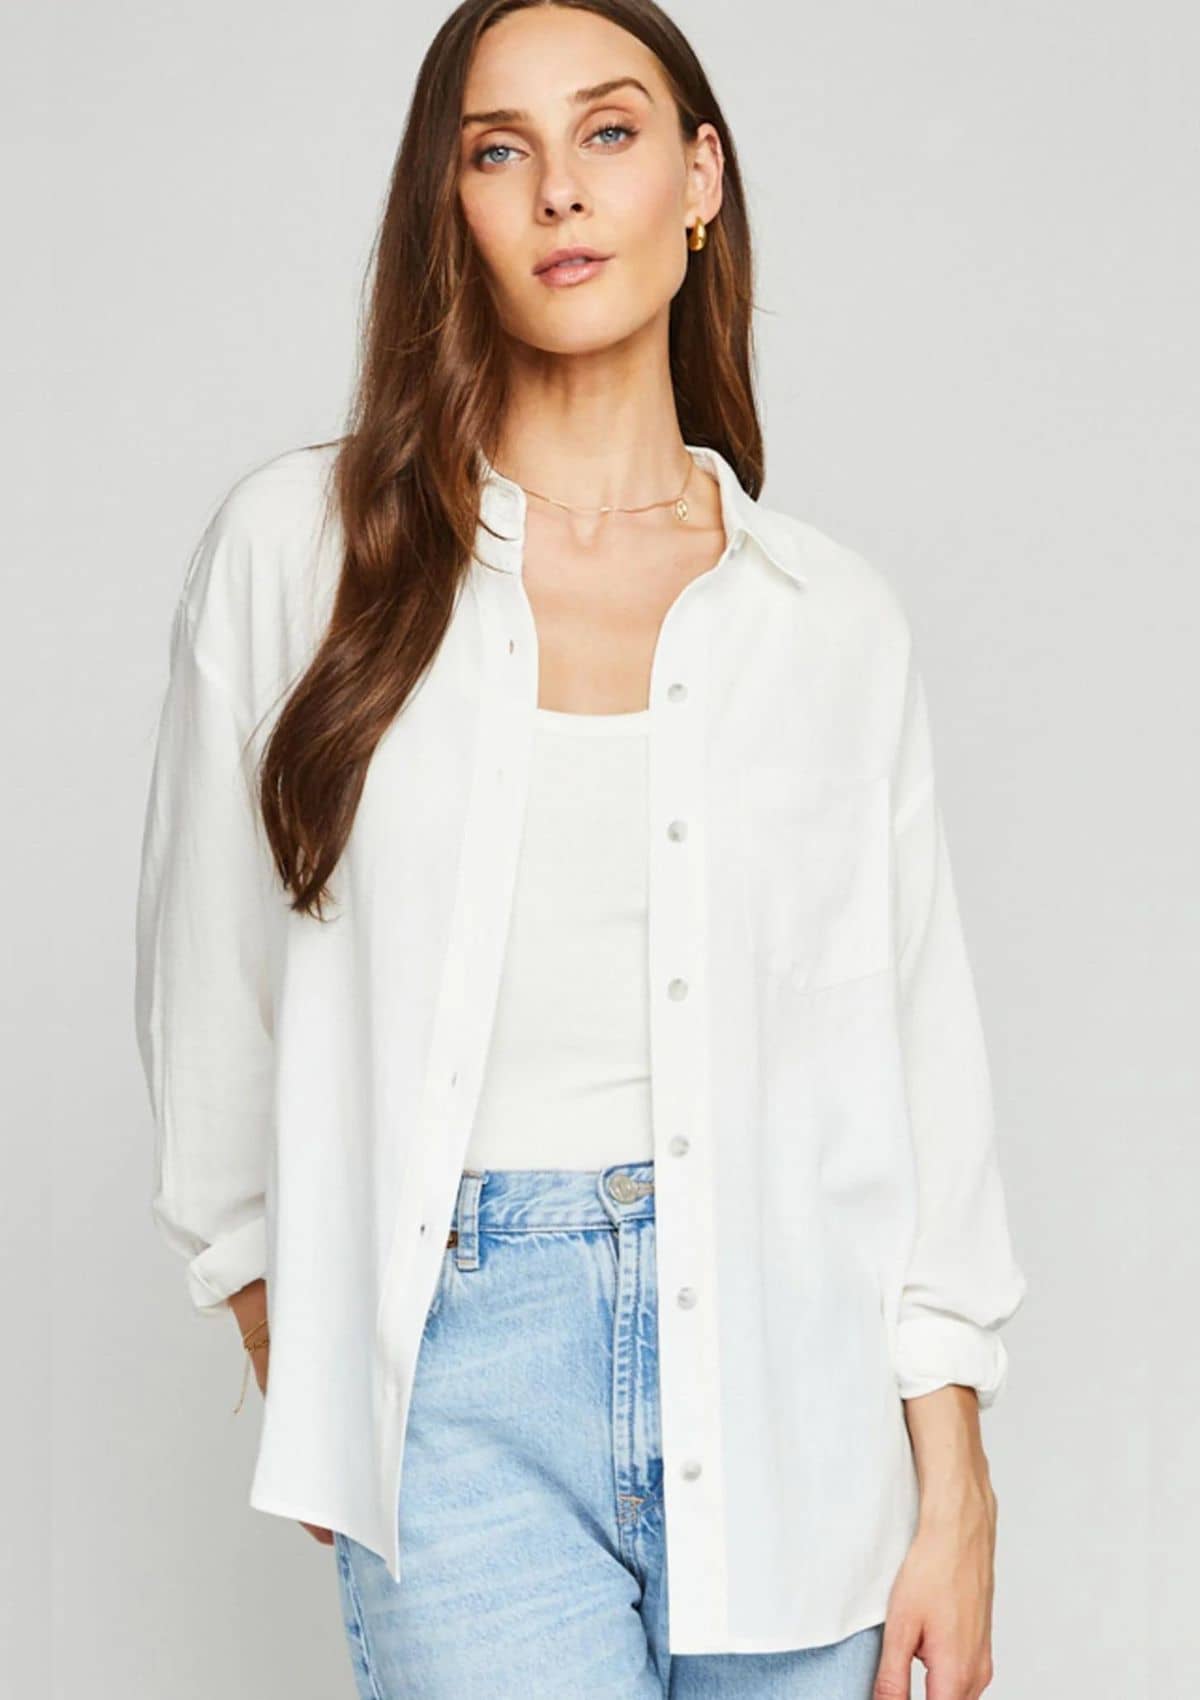 Hudson Long Sleeve Button Down Top - White -Gentle Fawn- Ruby Jane-